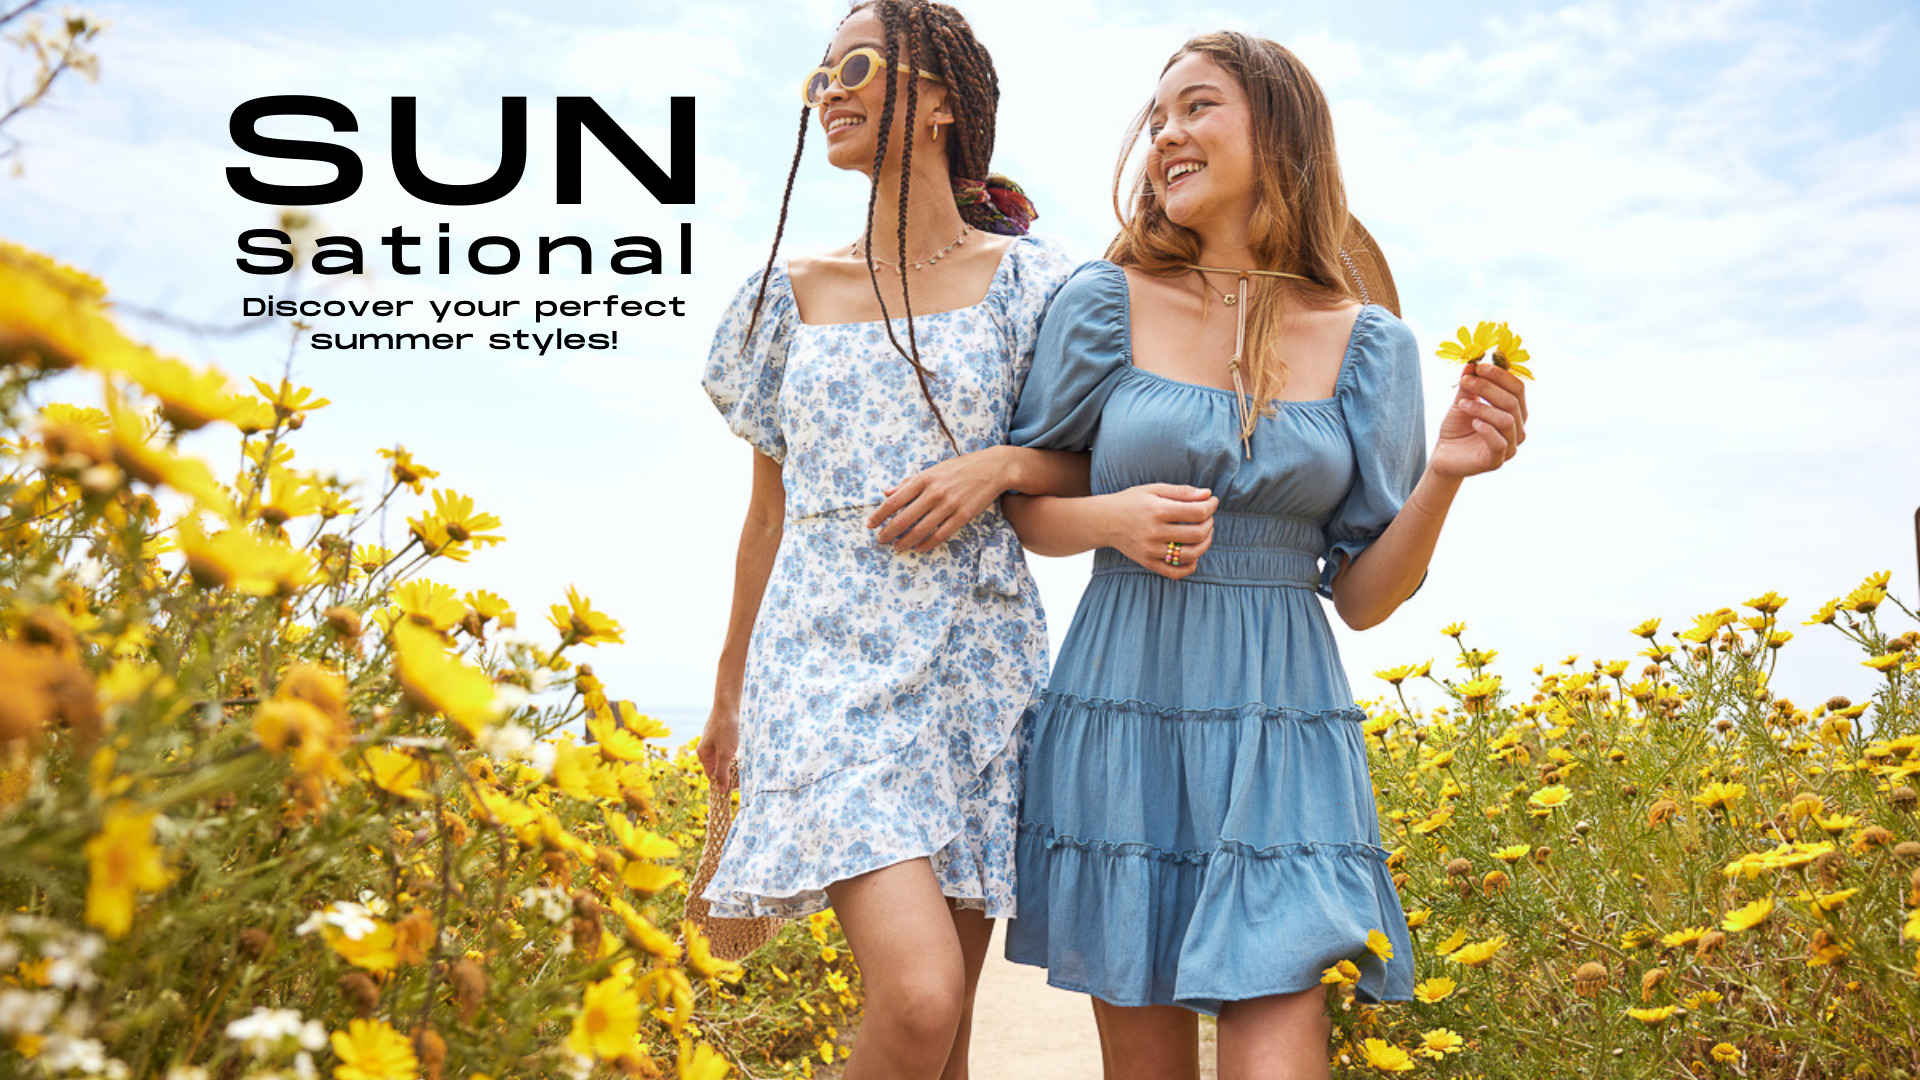 trixxi SUN-sational summer campaign with two girls walking in yellow flower field in a blue tier dress and a blue floral wrap ruffle dress.